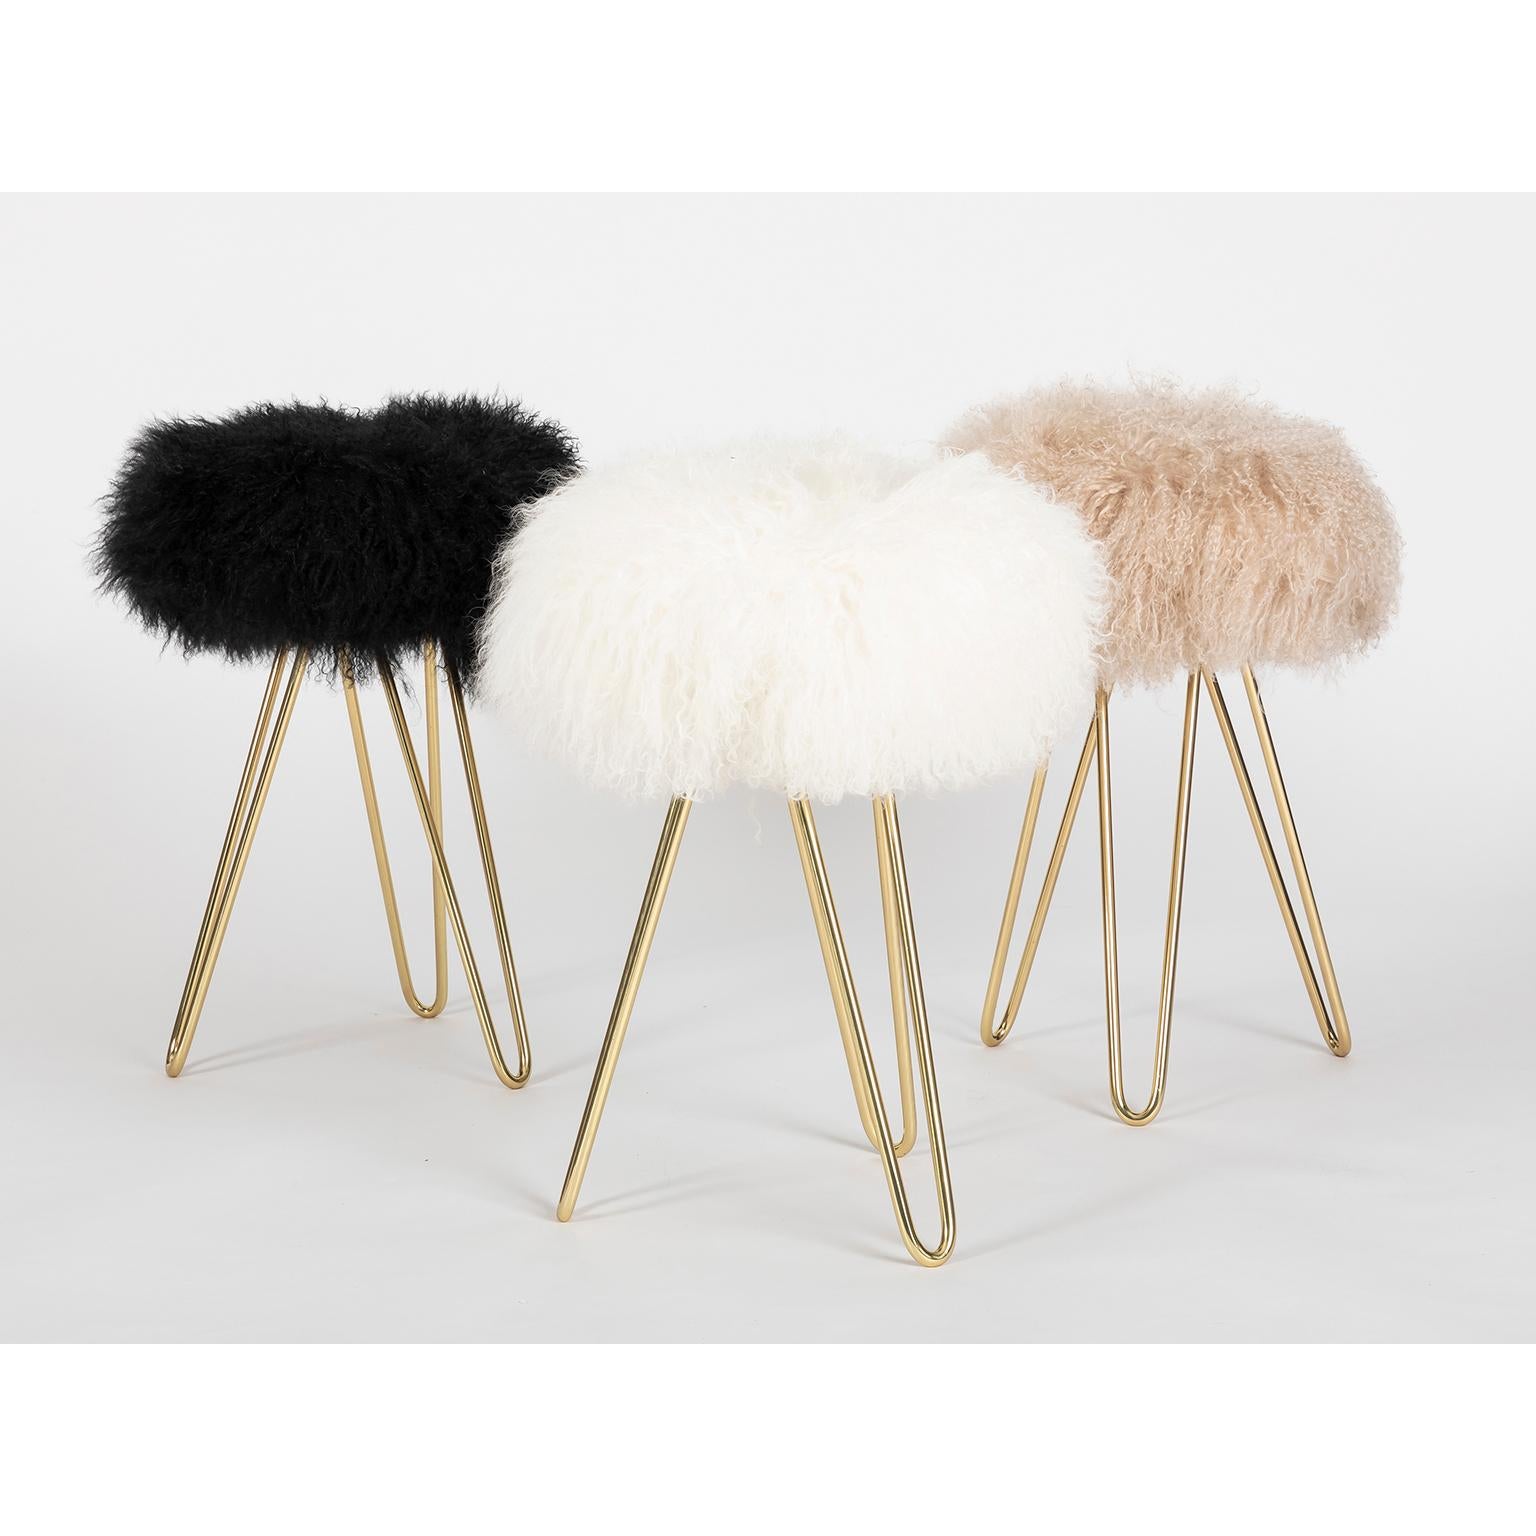 Designed by our studio, this lovely small stool that can work also as a side table.

It is an iconic and playful piece that will lighten up every room!

The feet is in solid polished brass and the upholstery in Mongolian goat fur. It is